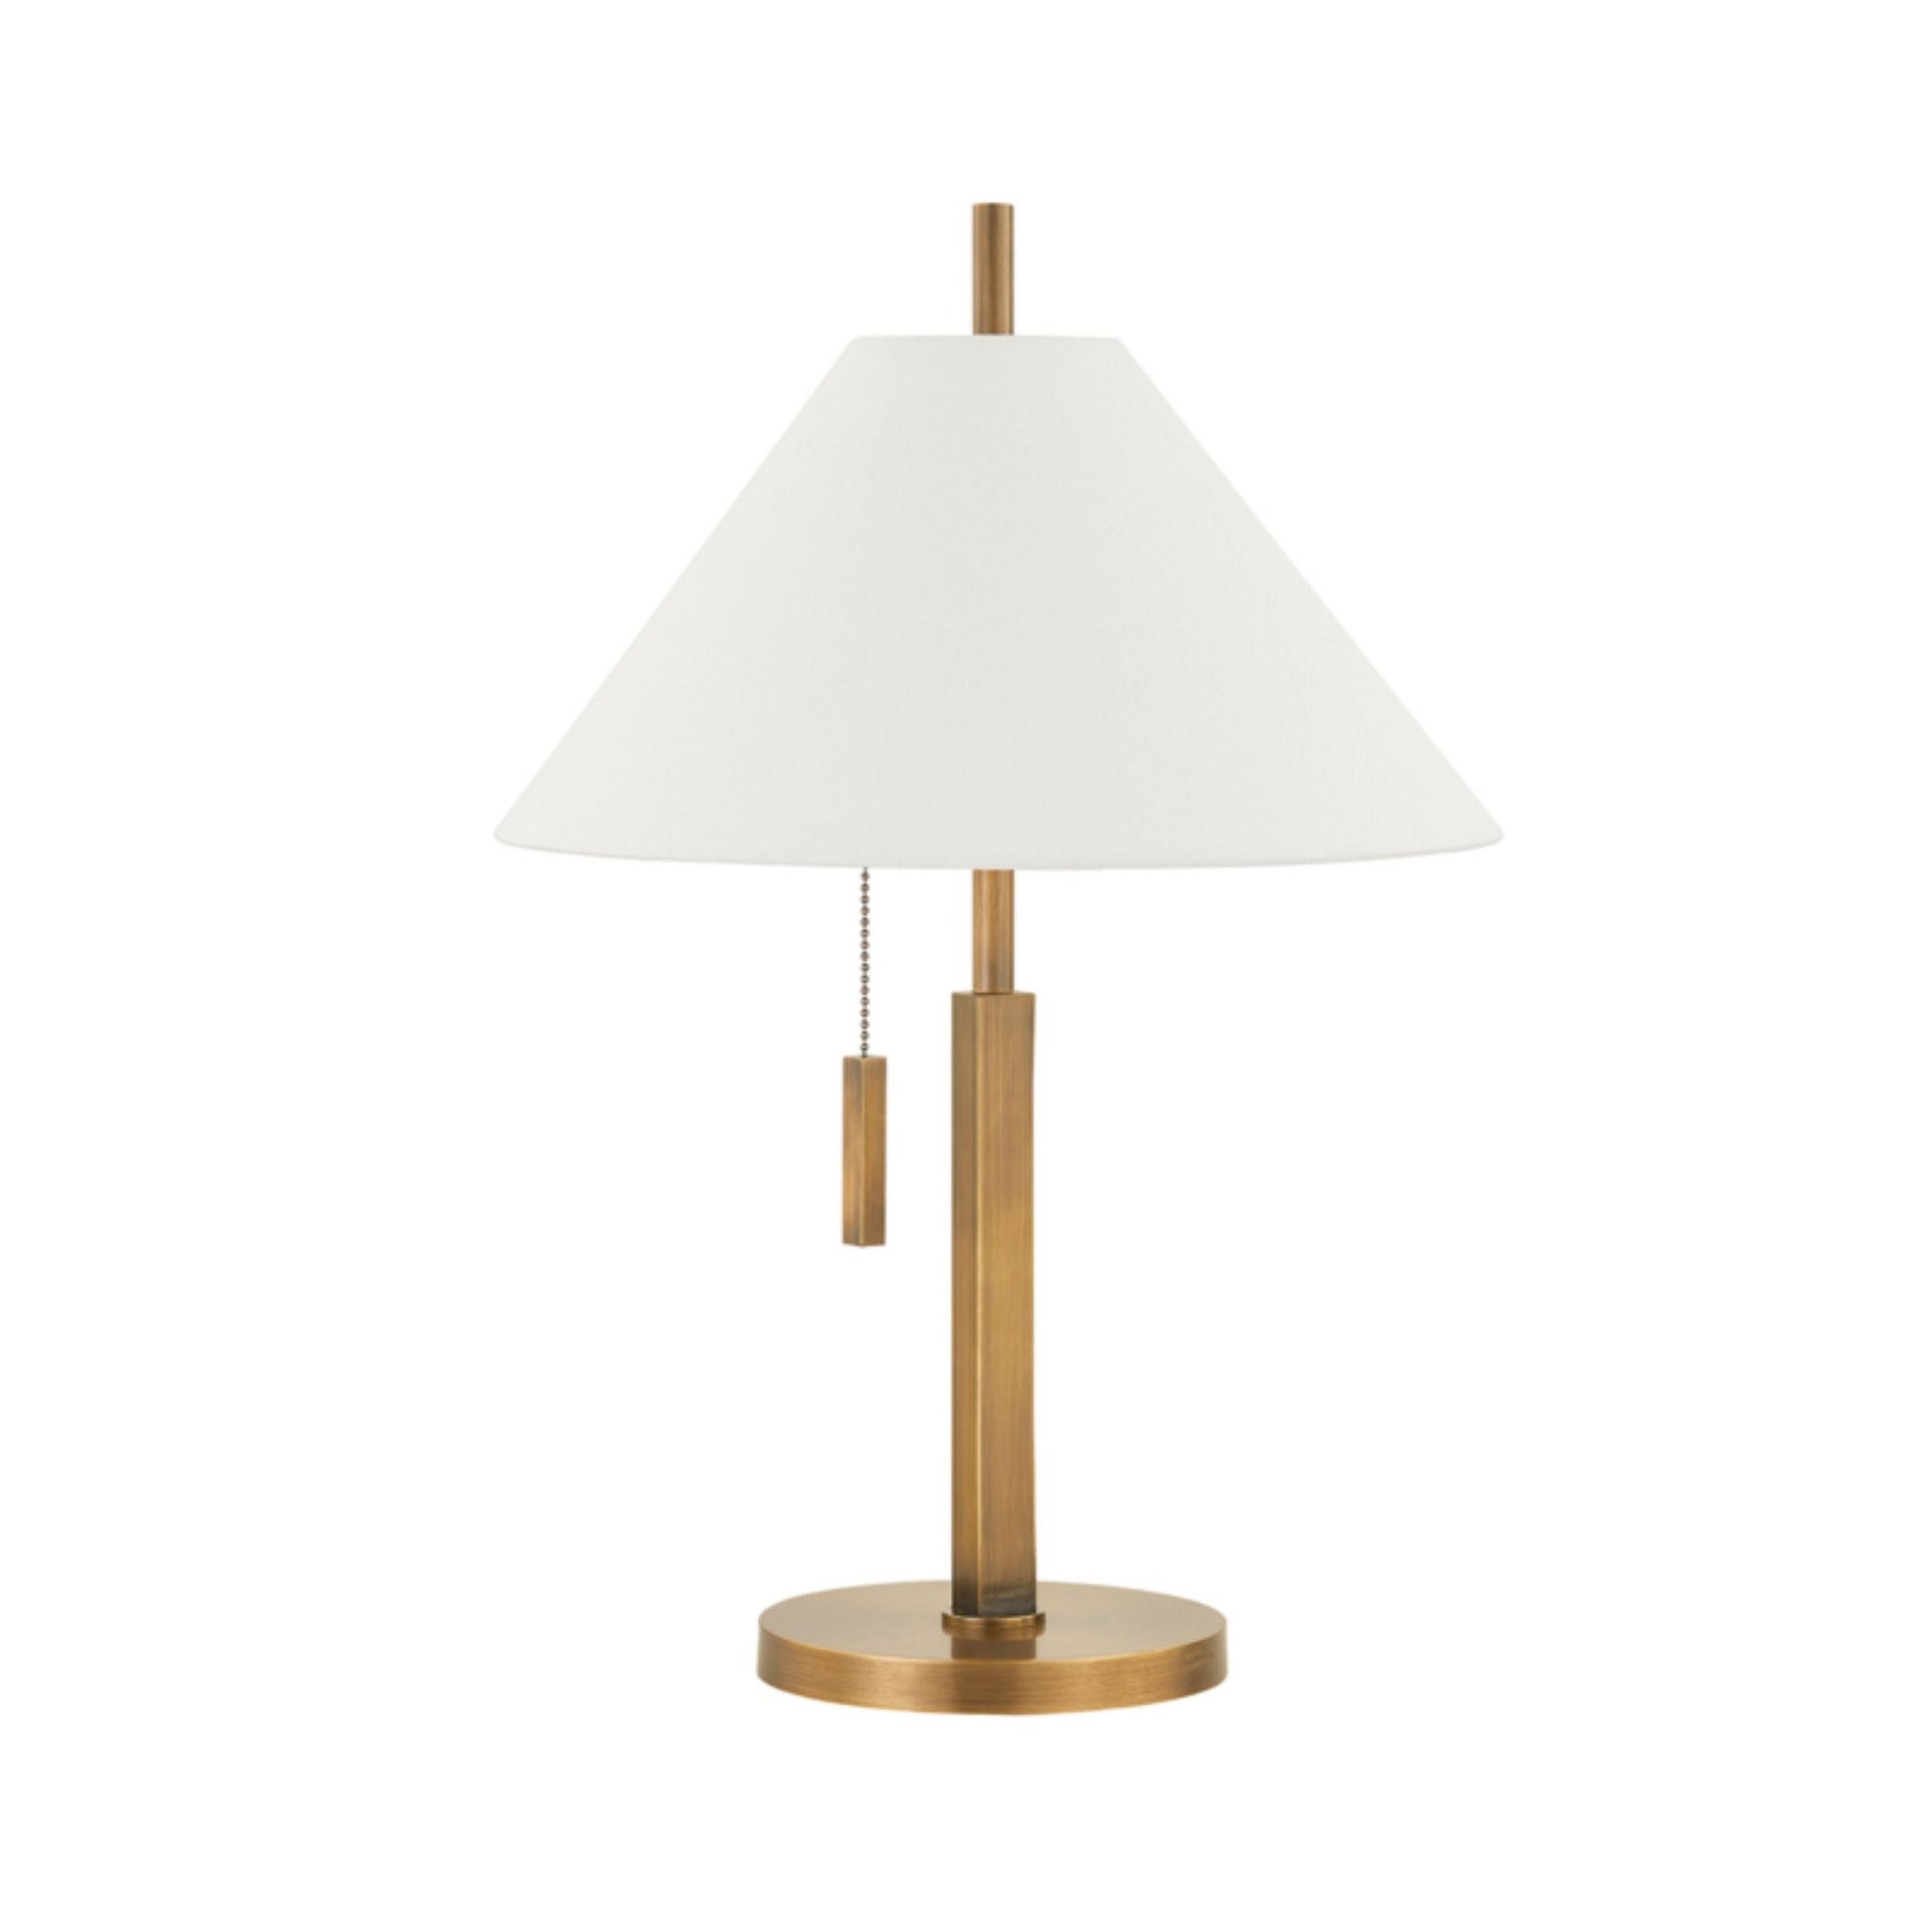 Clic 1 Light Table Lamp in Patina Brass by Colin King